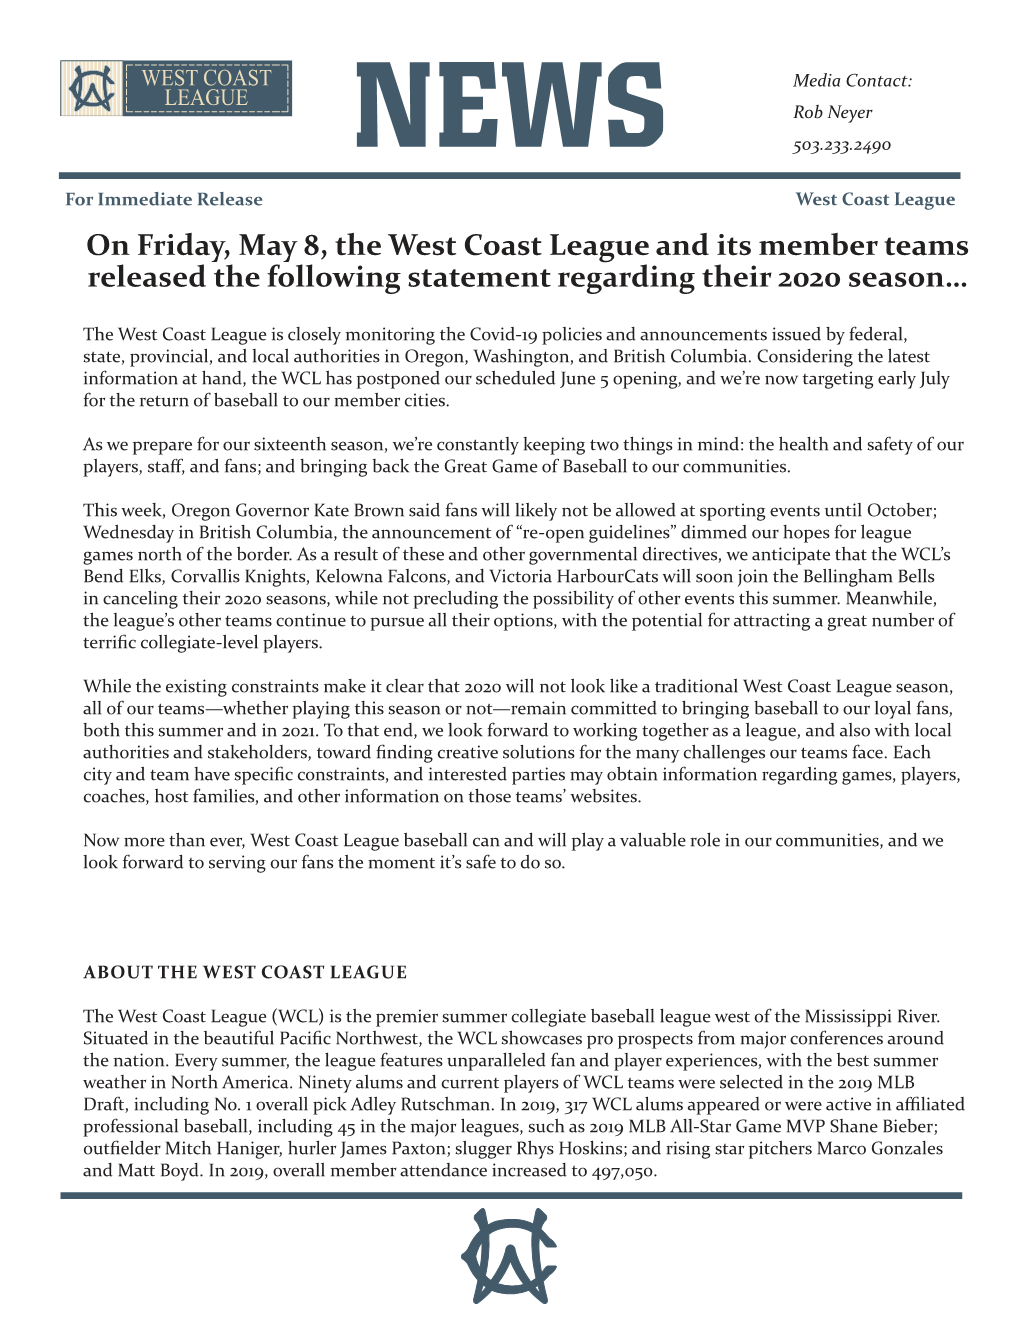 On Friday, May 8, the West Coast League and Its Member Teams Released the Following Statement Regarding Their 2020 Season…